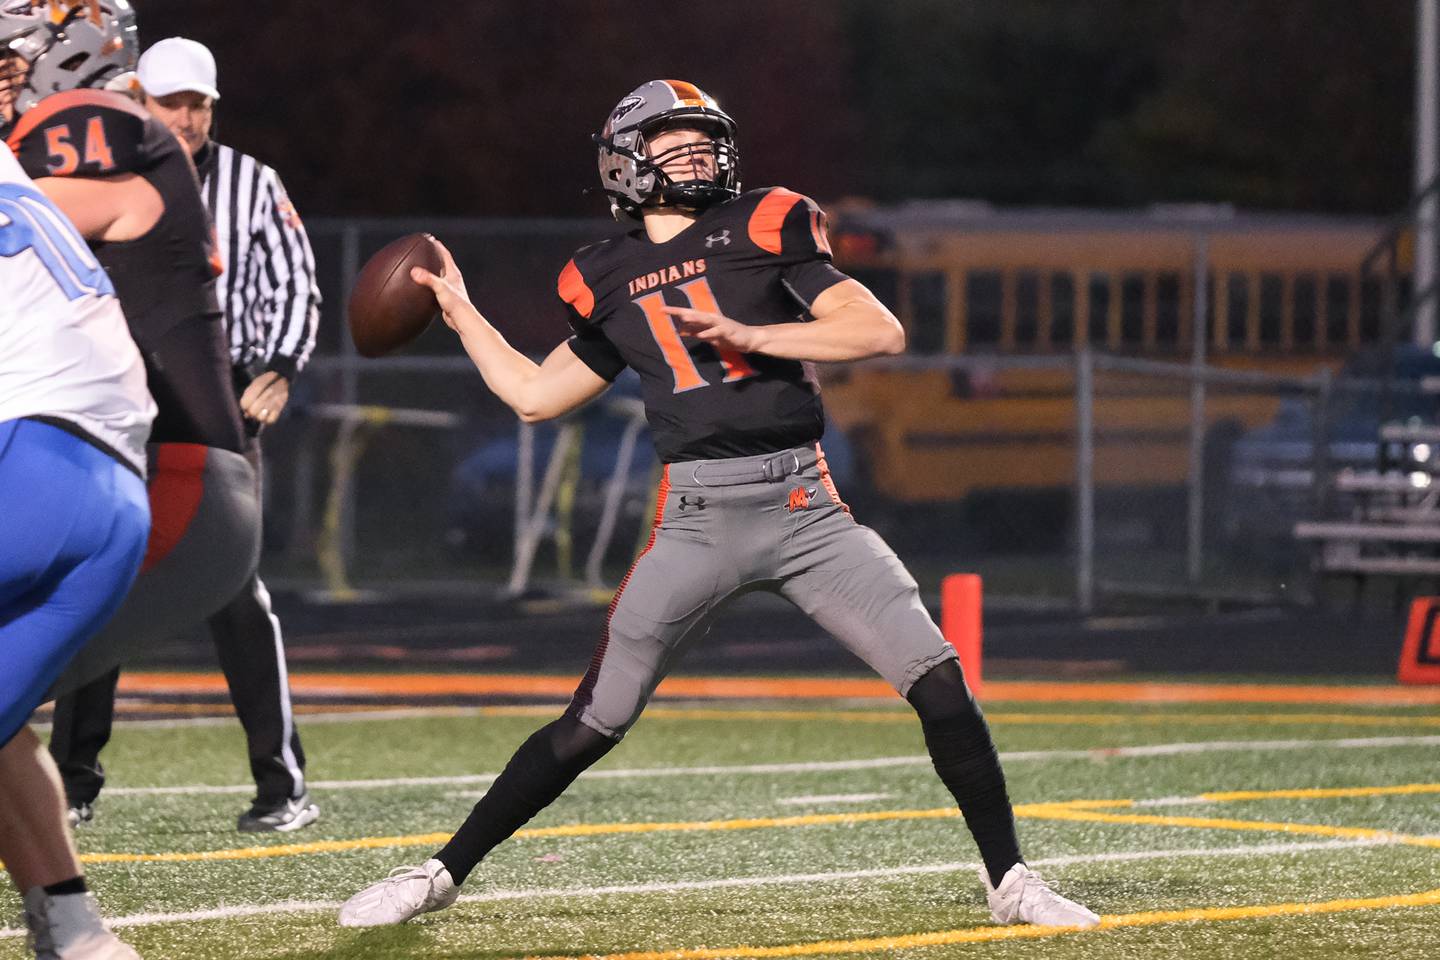 Minooka's Gavin Dooley throws a deep pass against Lincoln-Way East in the Class 8A 2nd round playoffs in Minooka on Saturday, Nov. 6, 2021.